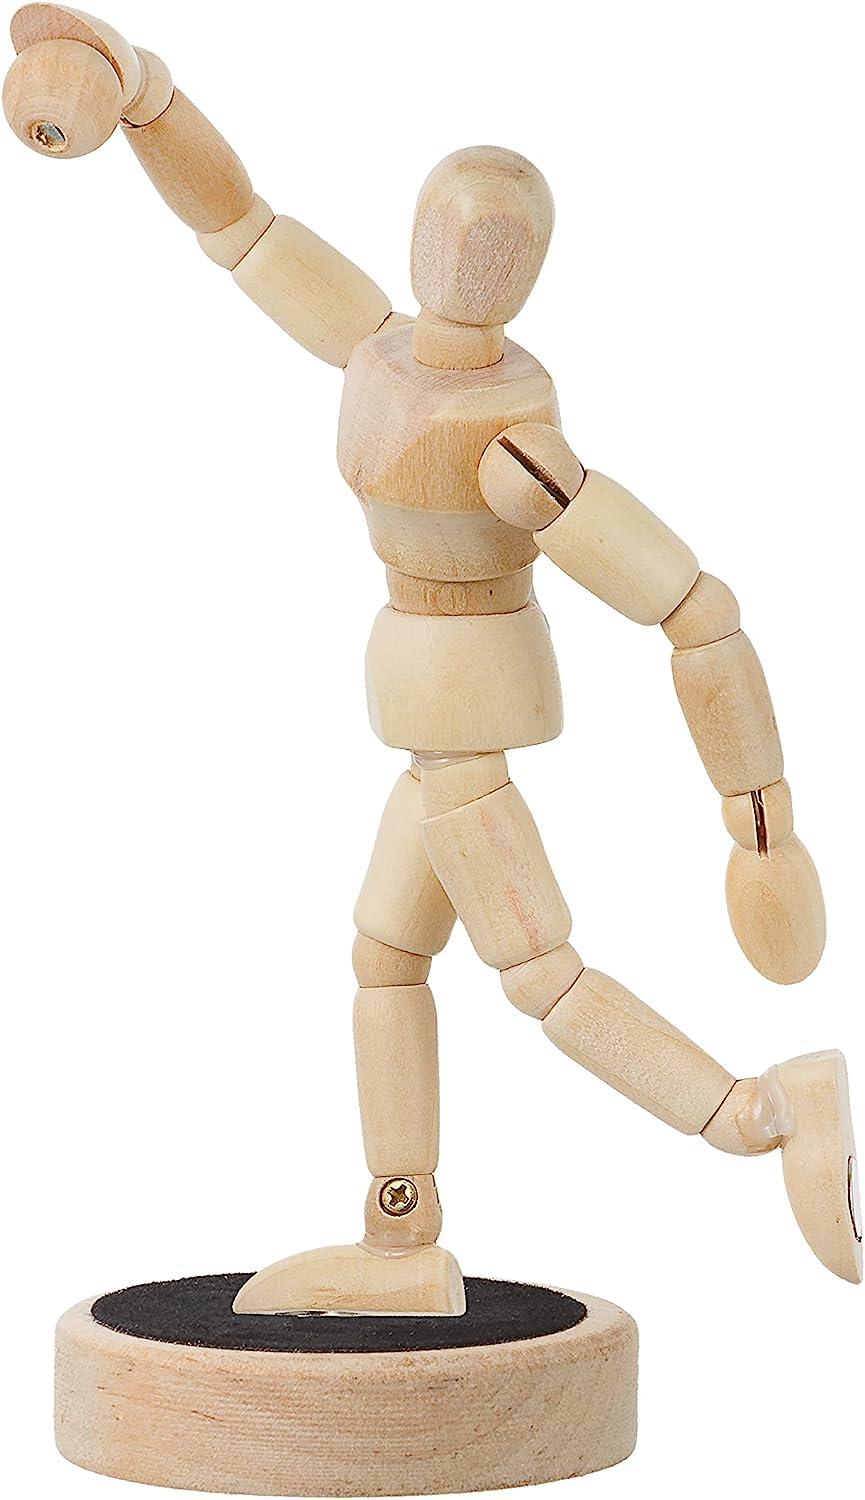 A Wooden Mannequin In A Sitting Position Stock Photo, Picture and Royalty  Free Image. Image 88905469.